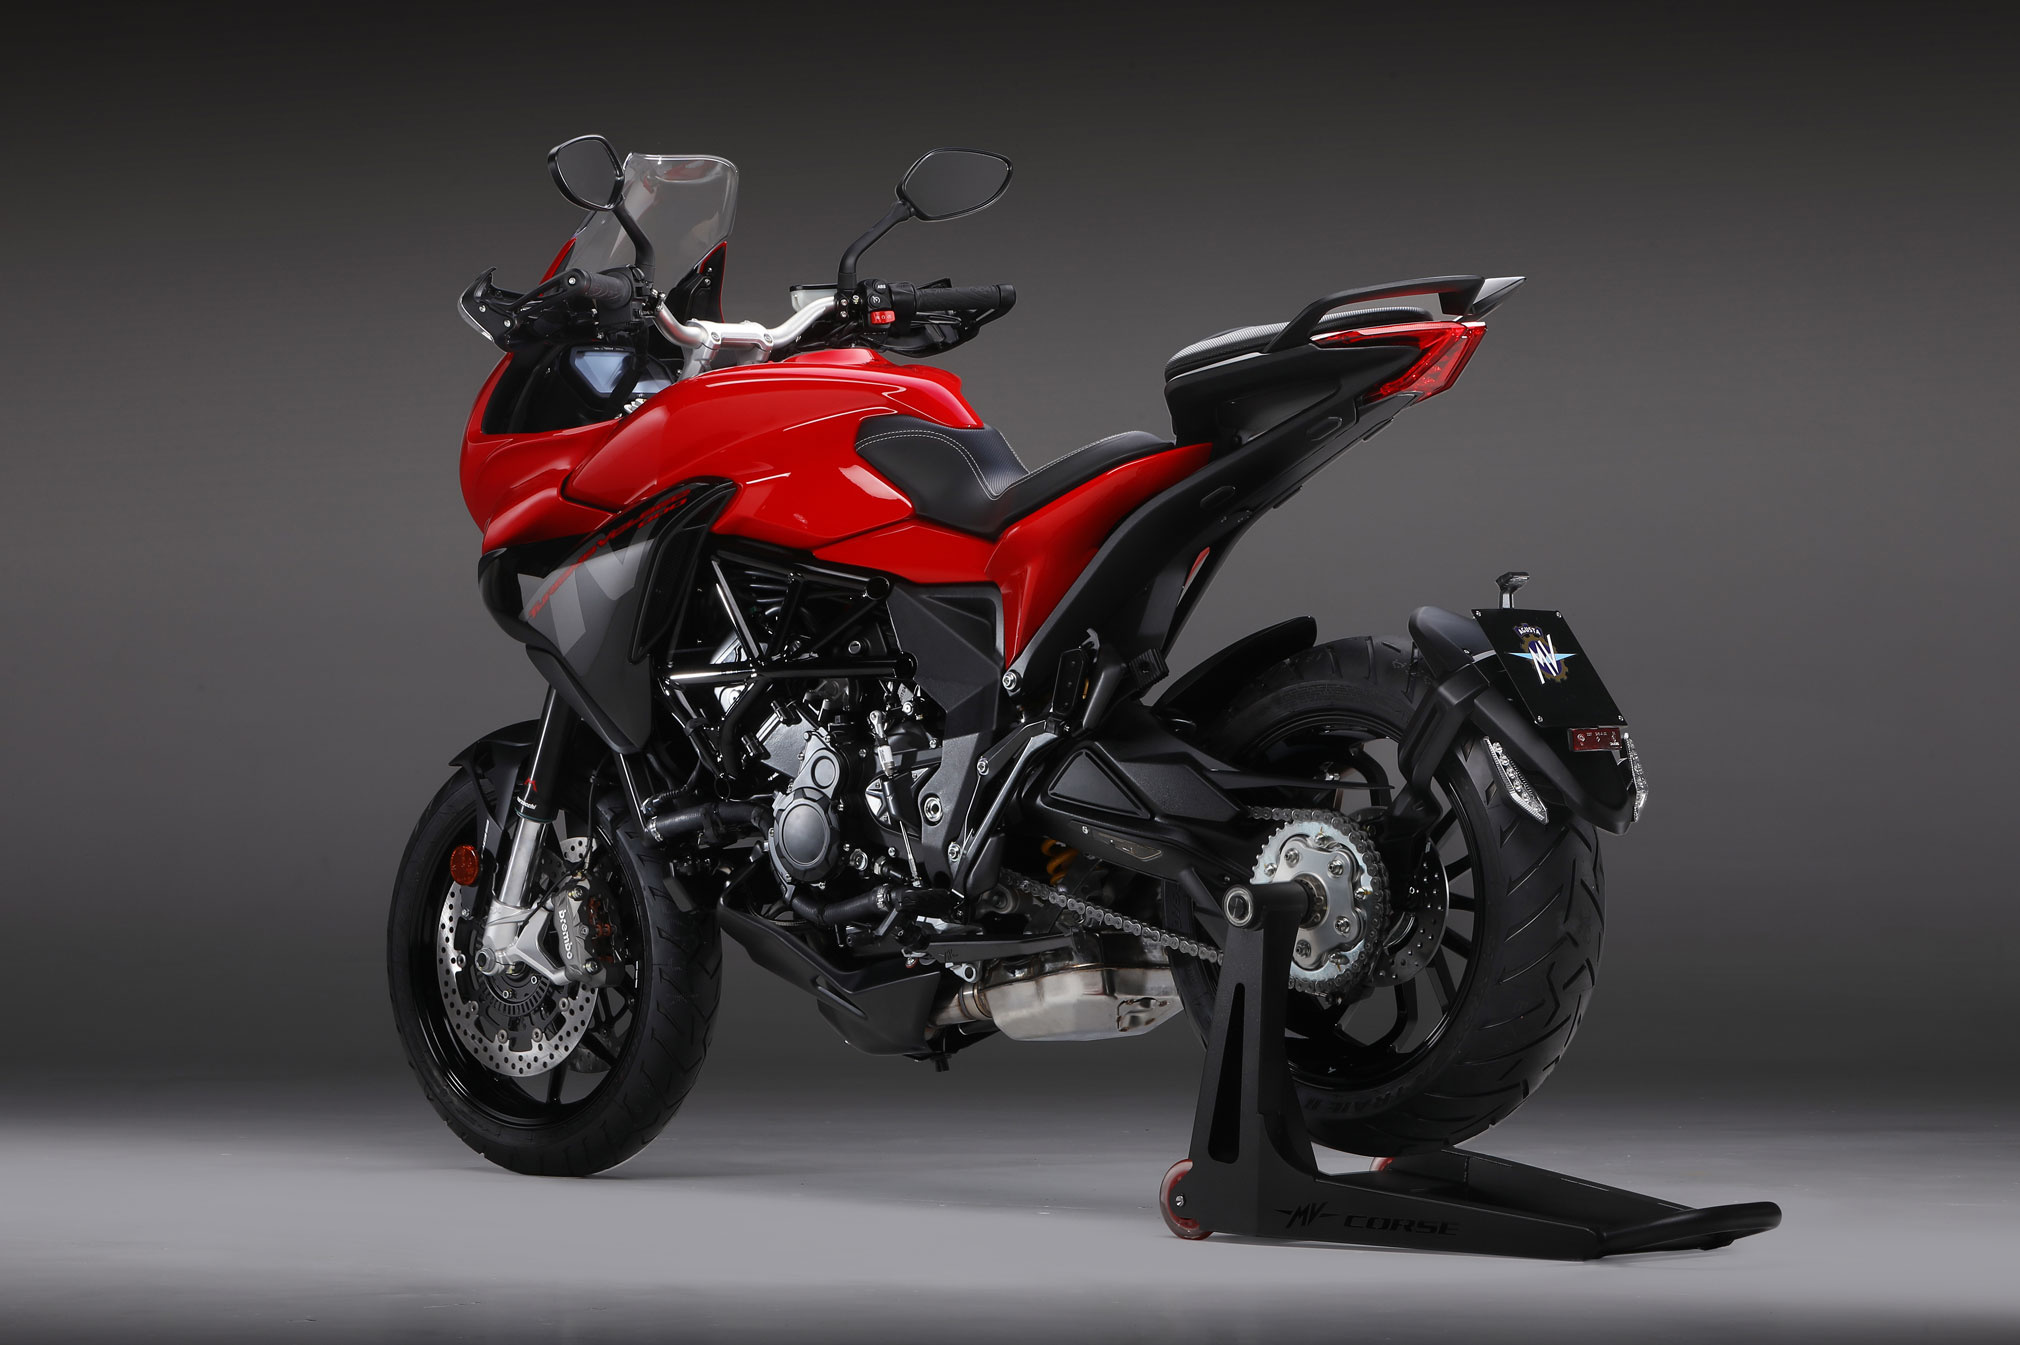 MV Agusta Turismo Veloce, 2020 edition, Red motorcycle, Total Motorcycle guide, 2020x1350 HD Desktop